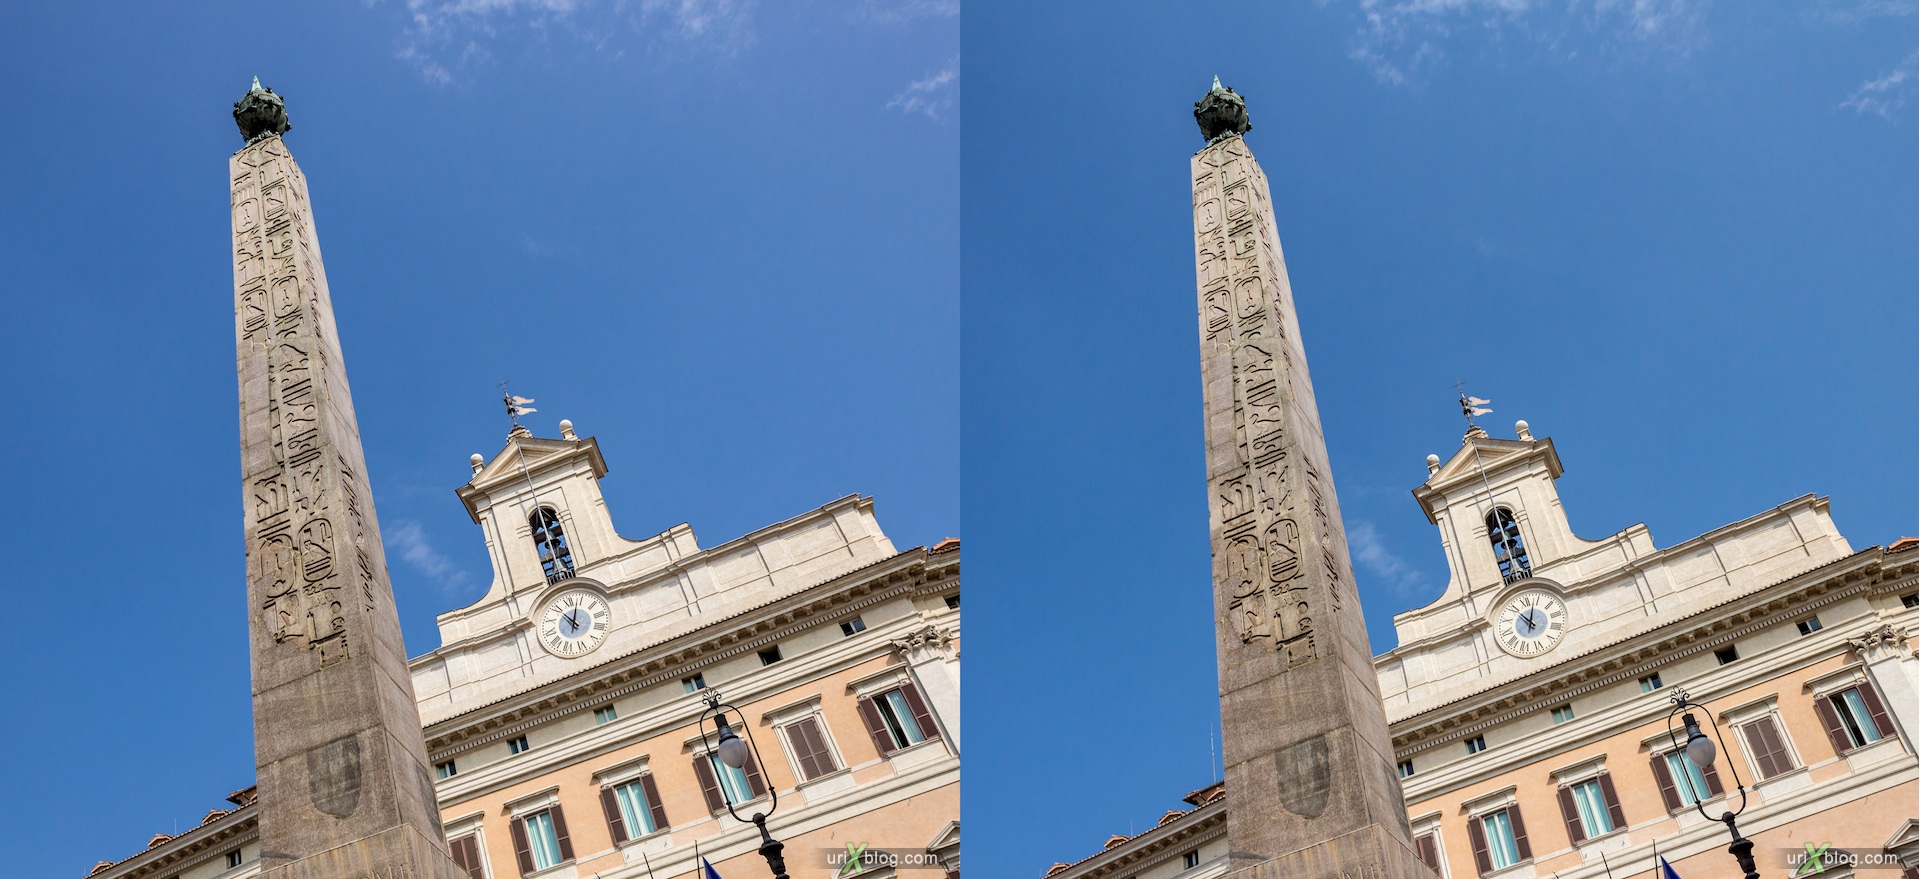 2012, obelisk of Montecitorio, parliament, Rome, Italy, 3D, stereo pair, cross-eyed, crossview, cross view stereo pair